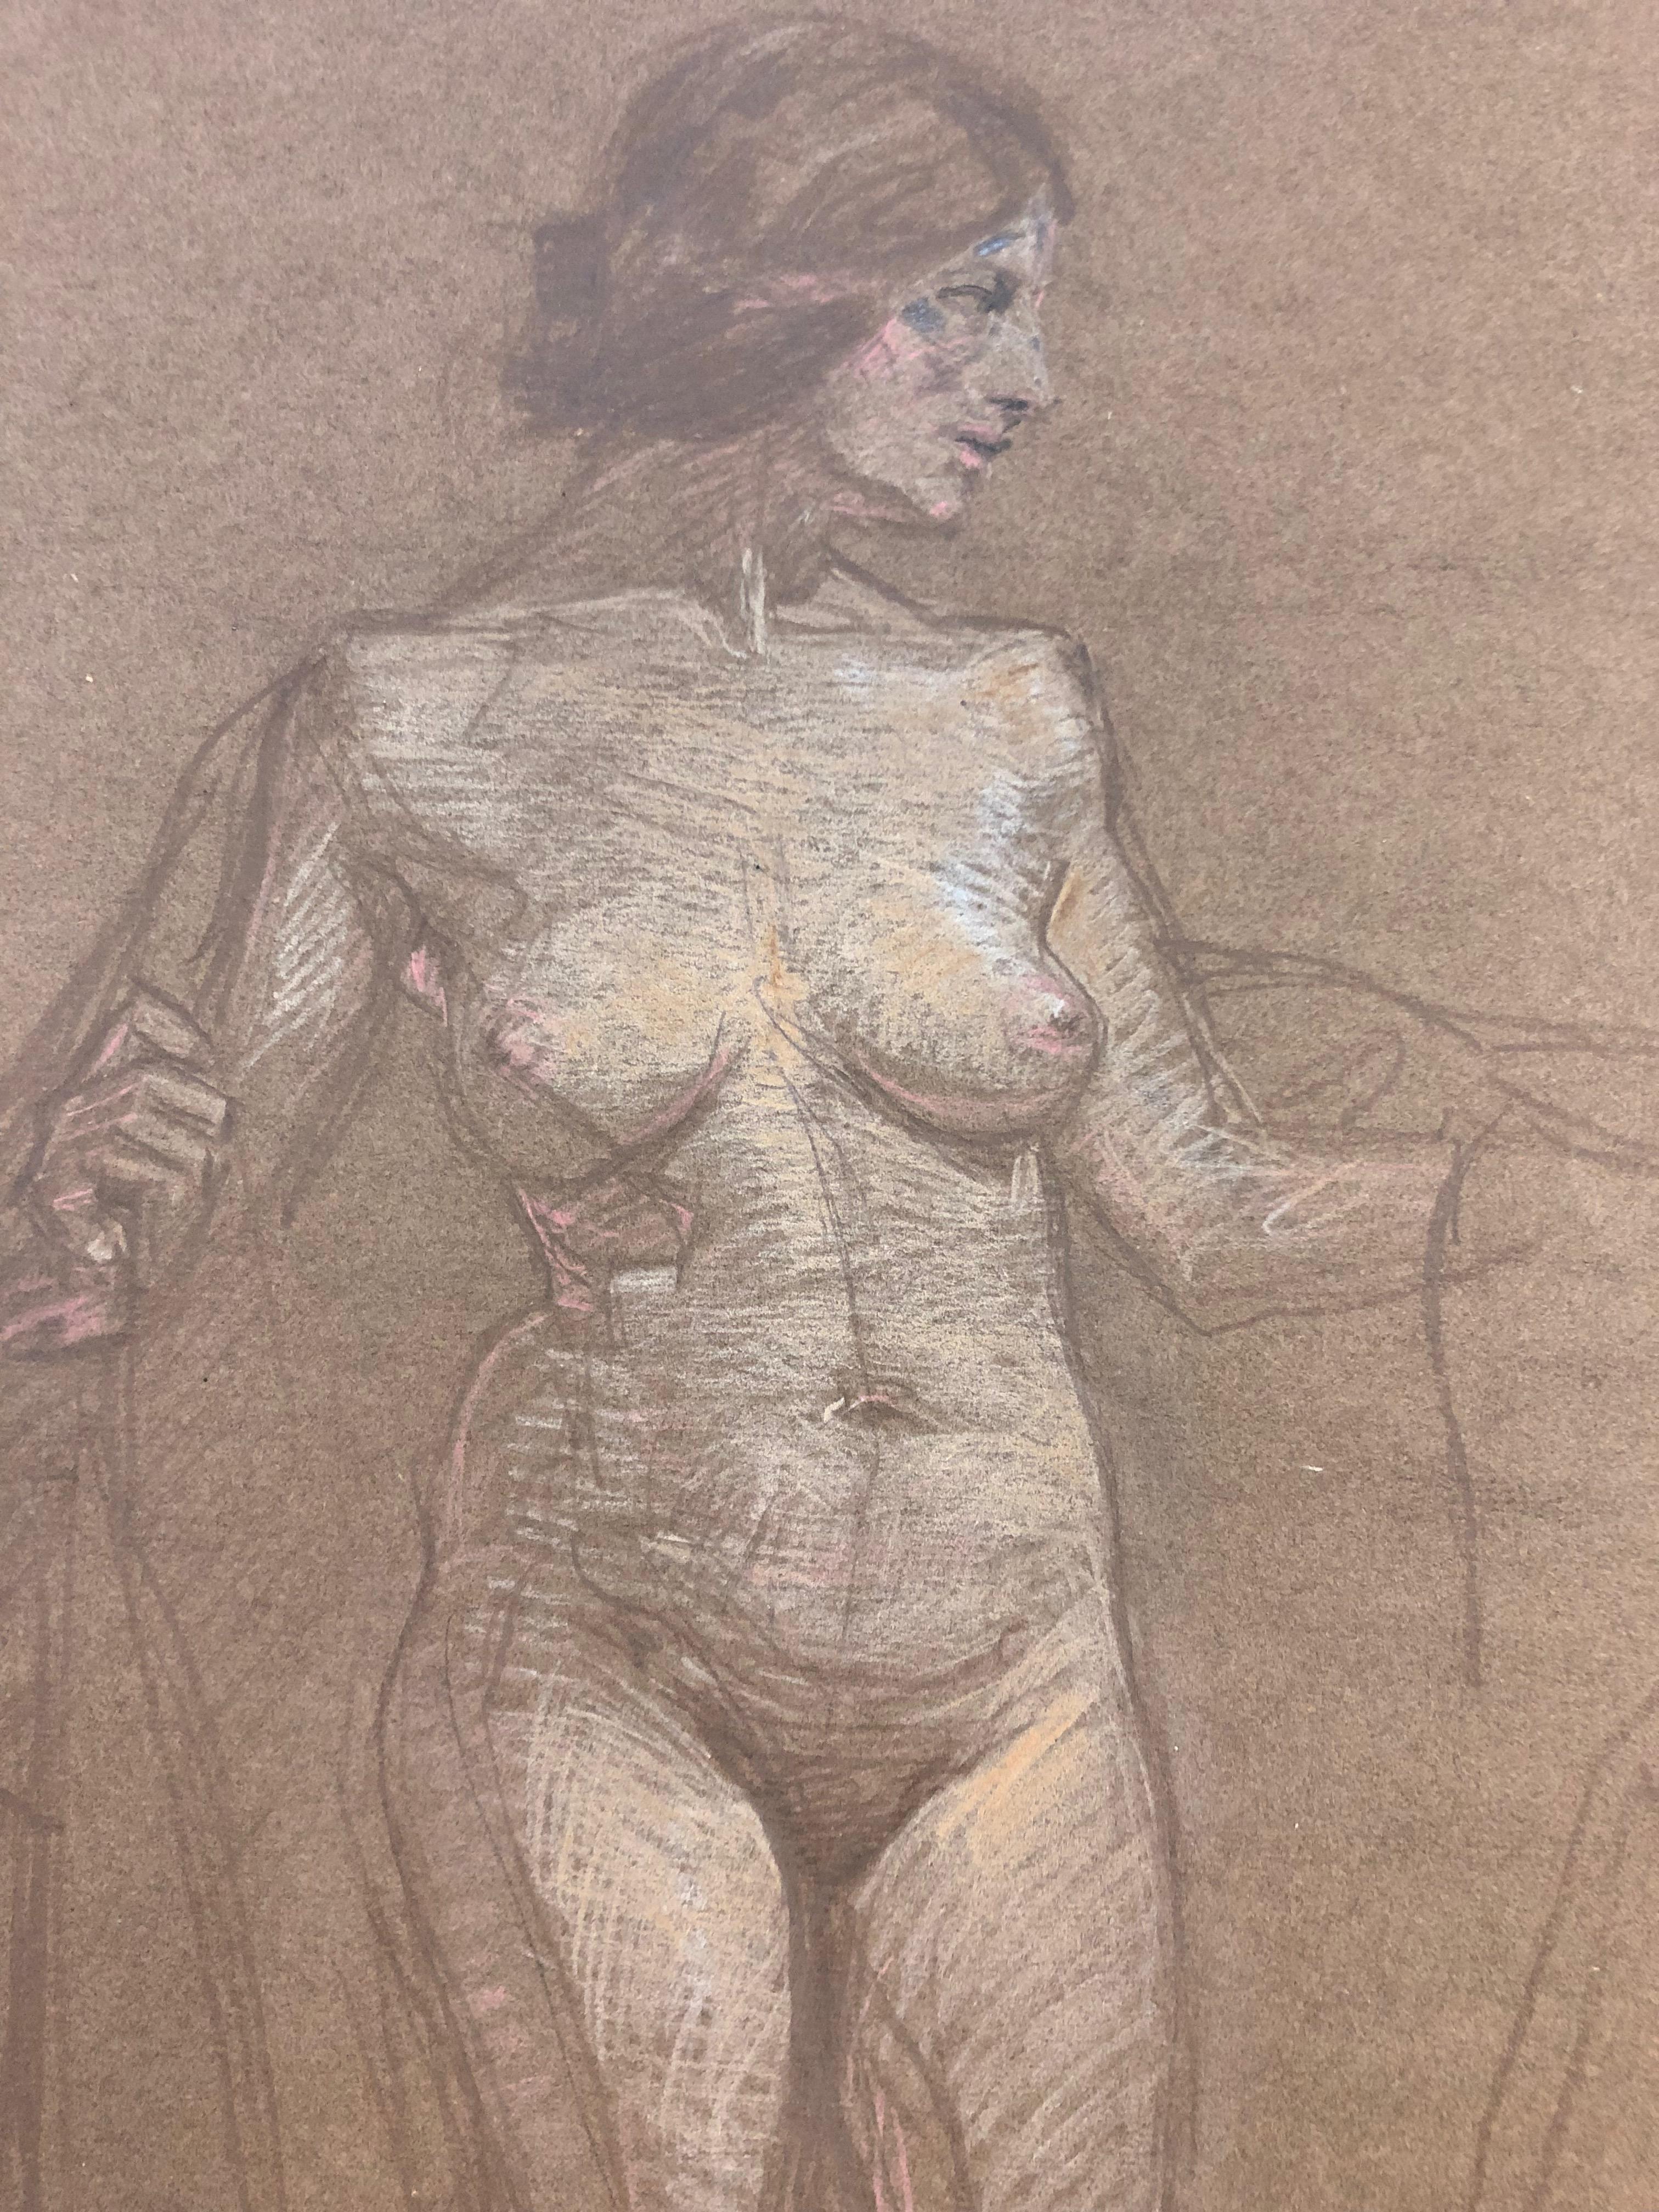 Standing Nude drawing on gray paper
Pencil signed and dated April 8, 21.
Printmaker, painter and illustrator, George Kenneth Hartwell was born in Fitchburg 1891-1949, Massachusetts. He studied at the Art Students' League in New York City under